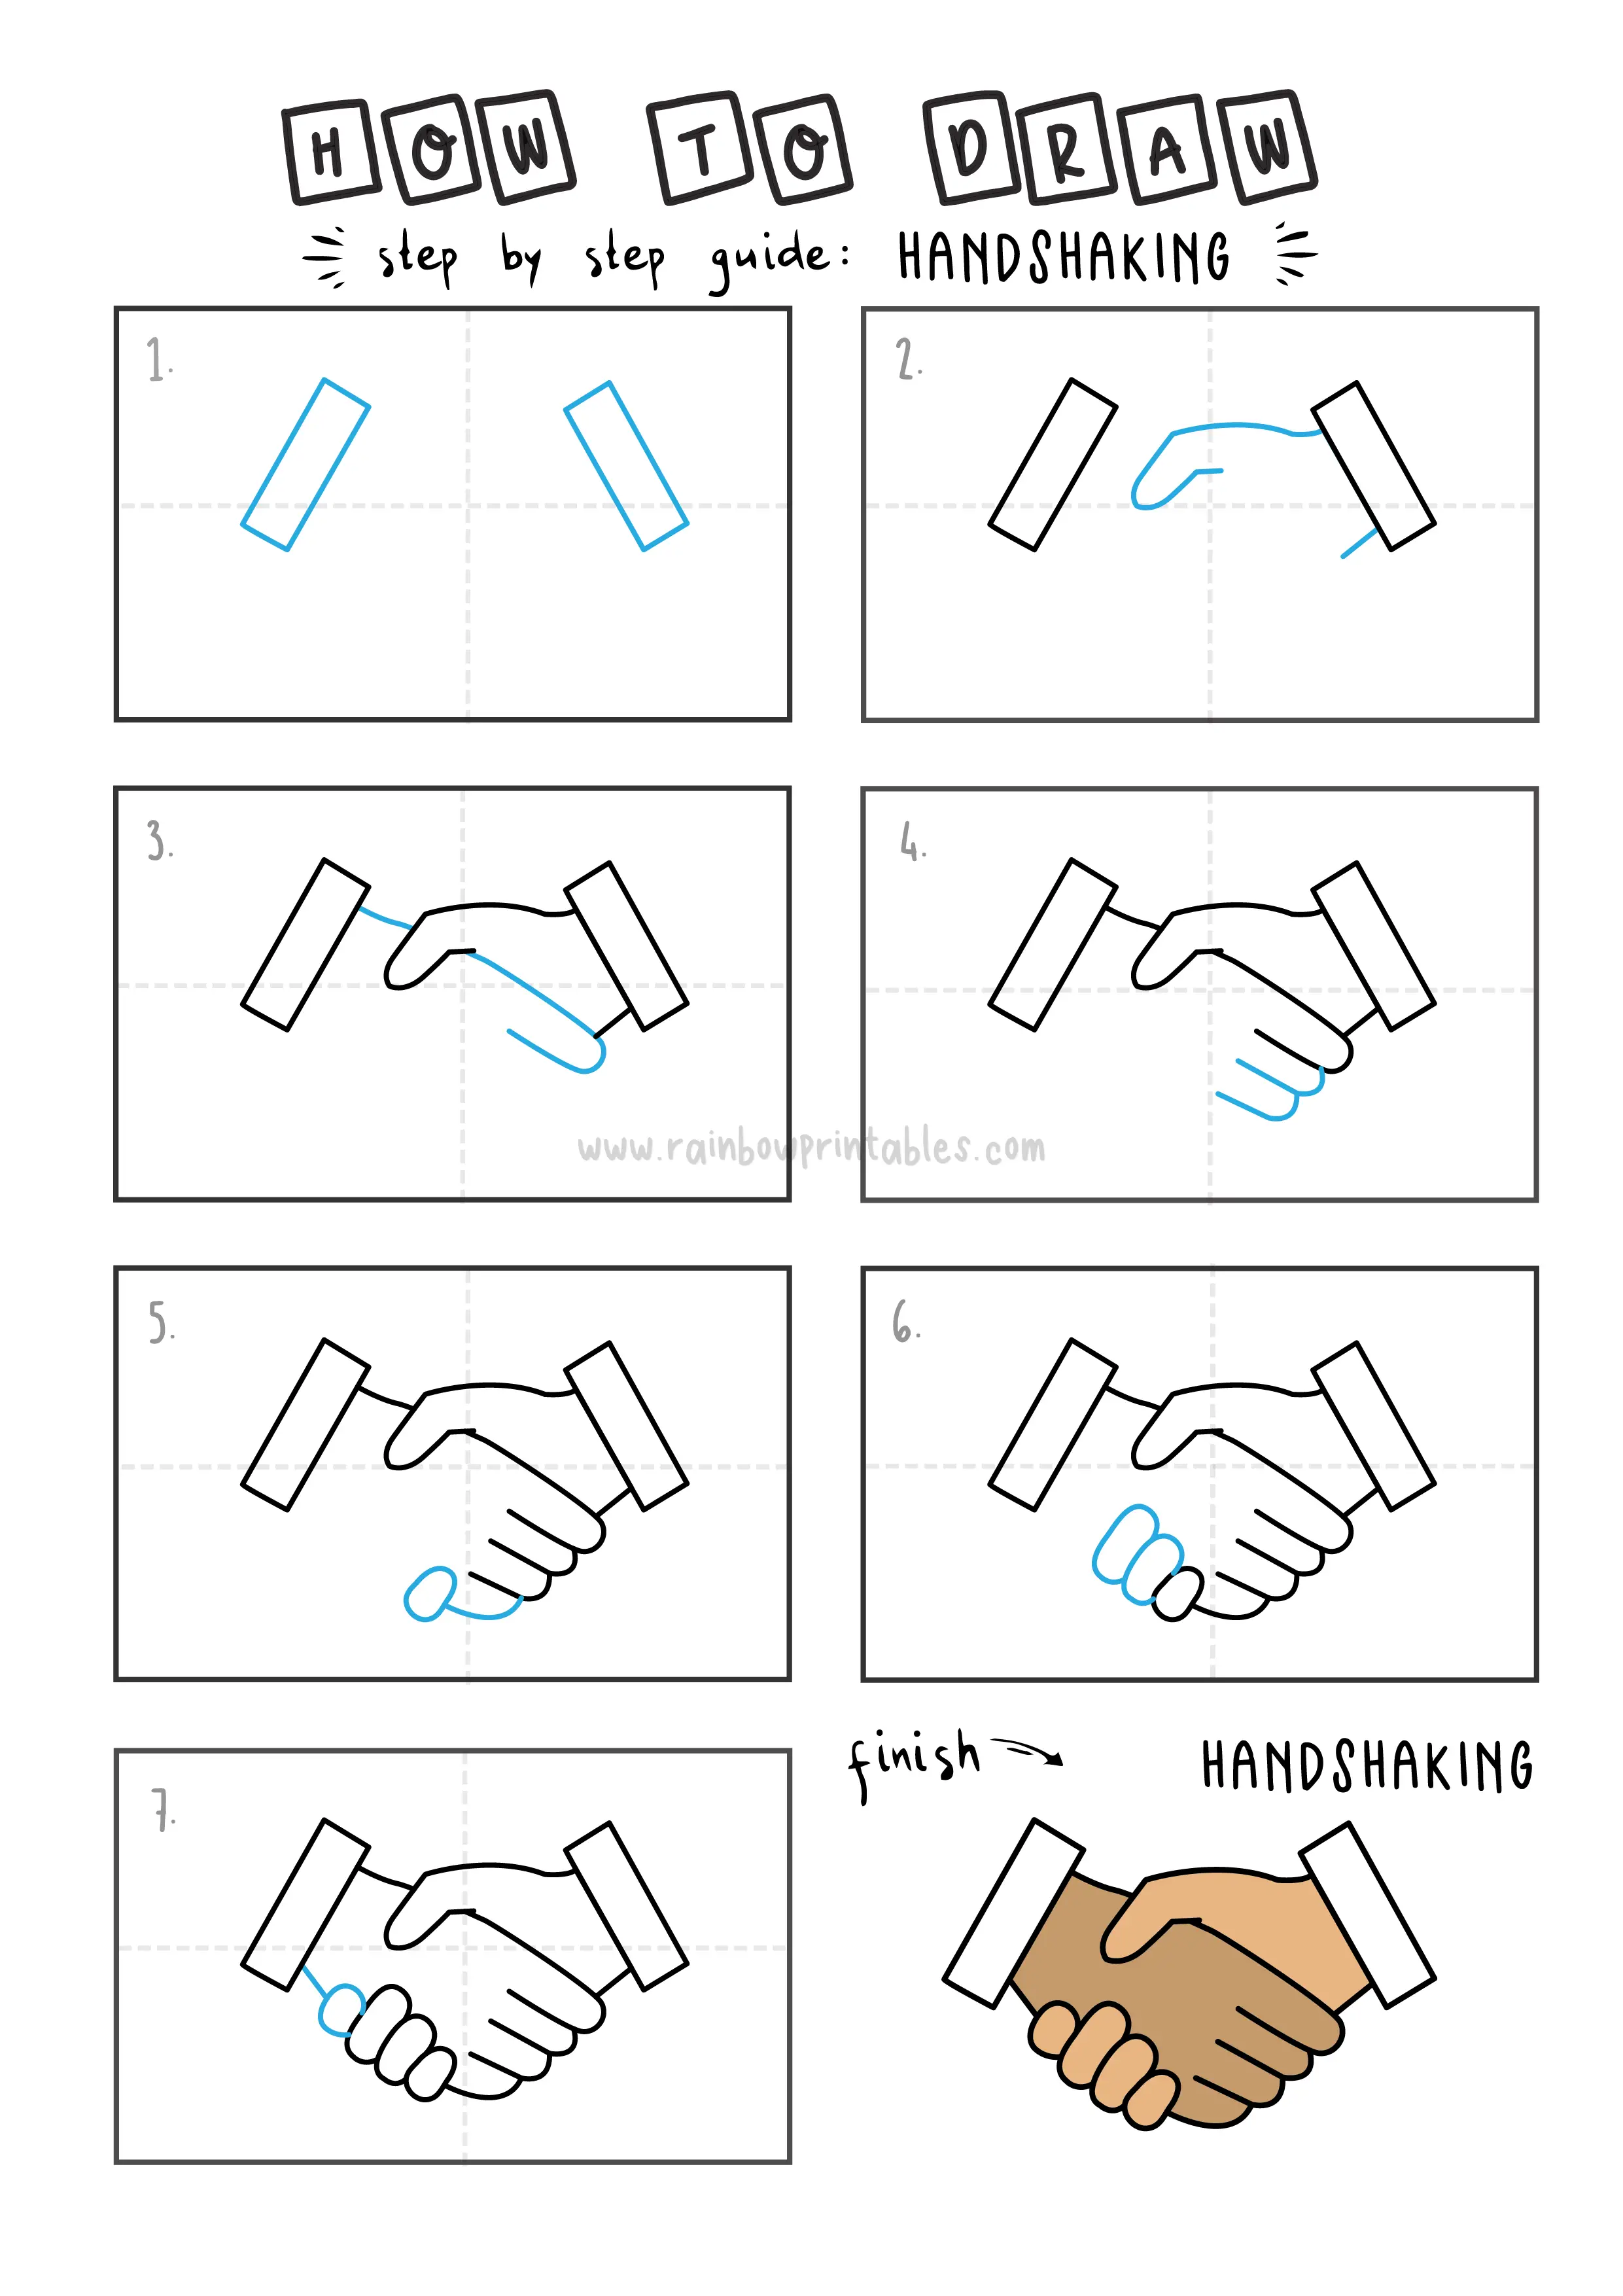 How To Draw Tutorials For Kids SHAKING HANDS BUSINESS GESTURE Step by step for kids easy simple guide